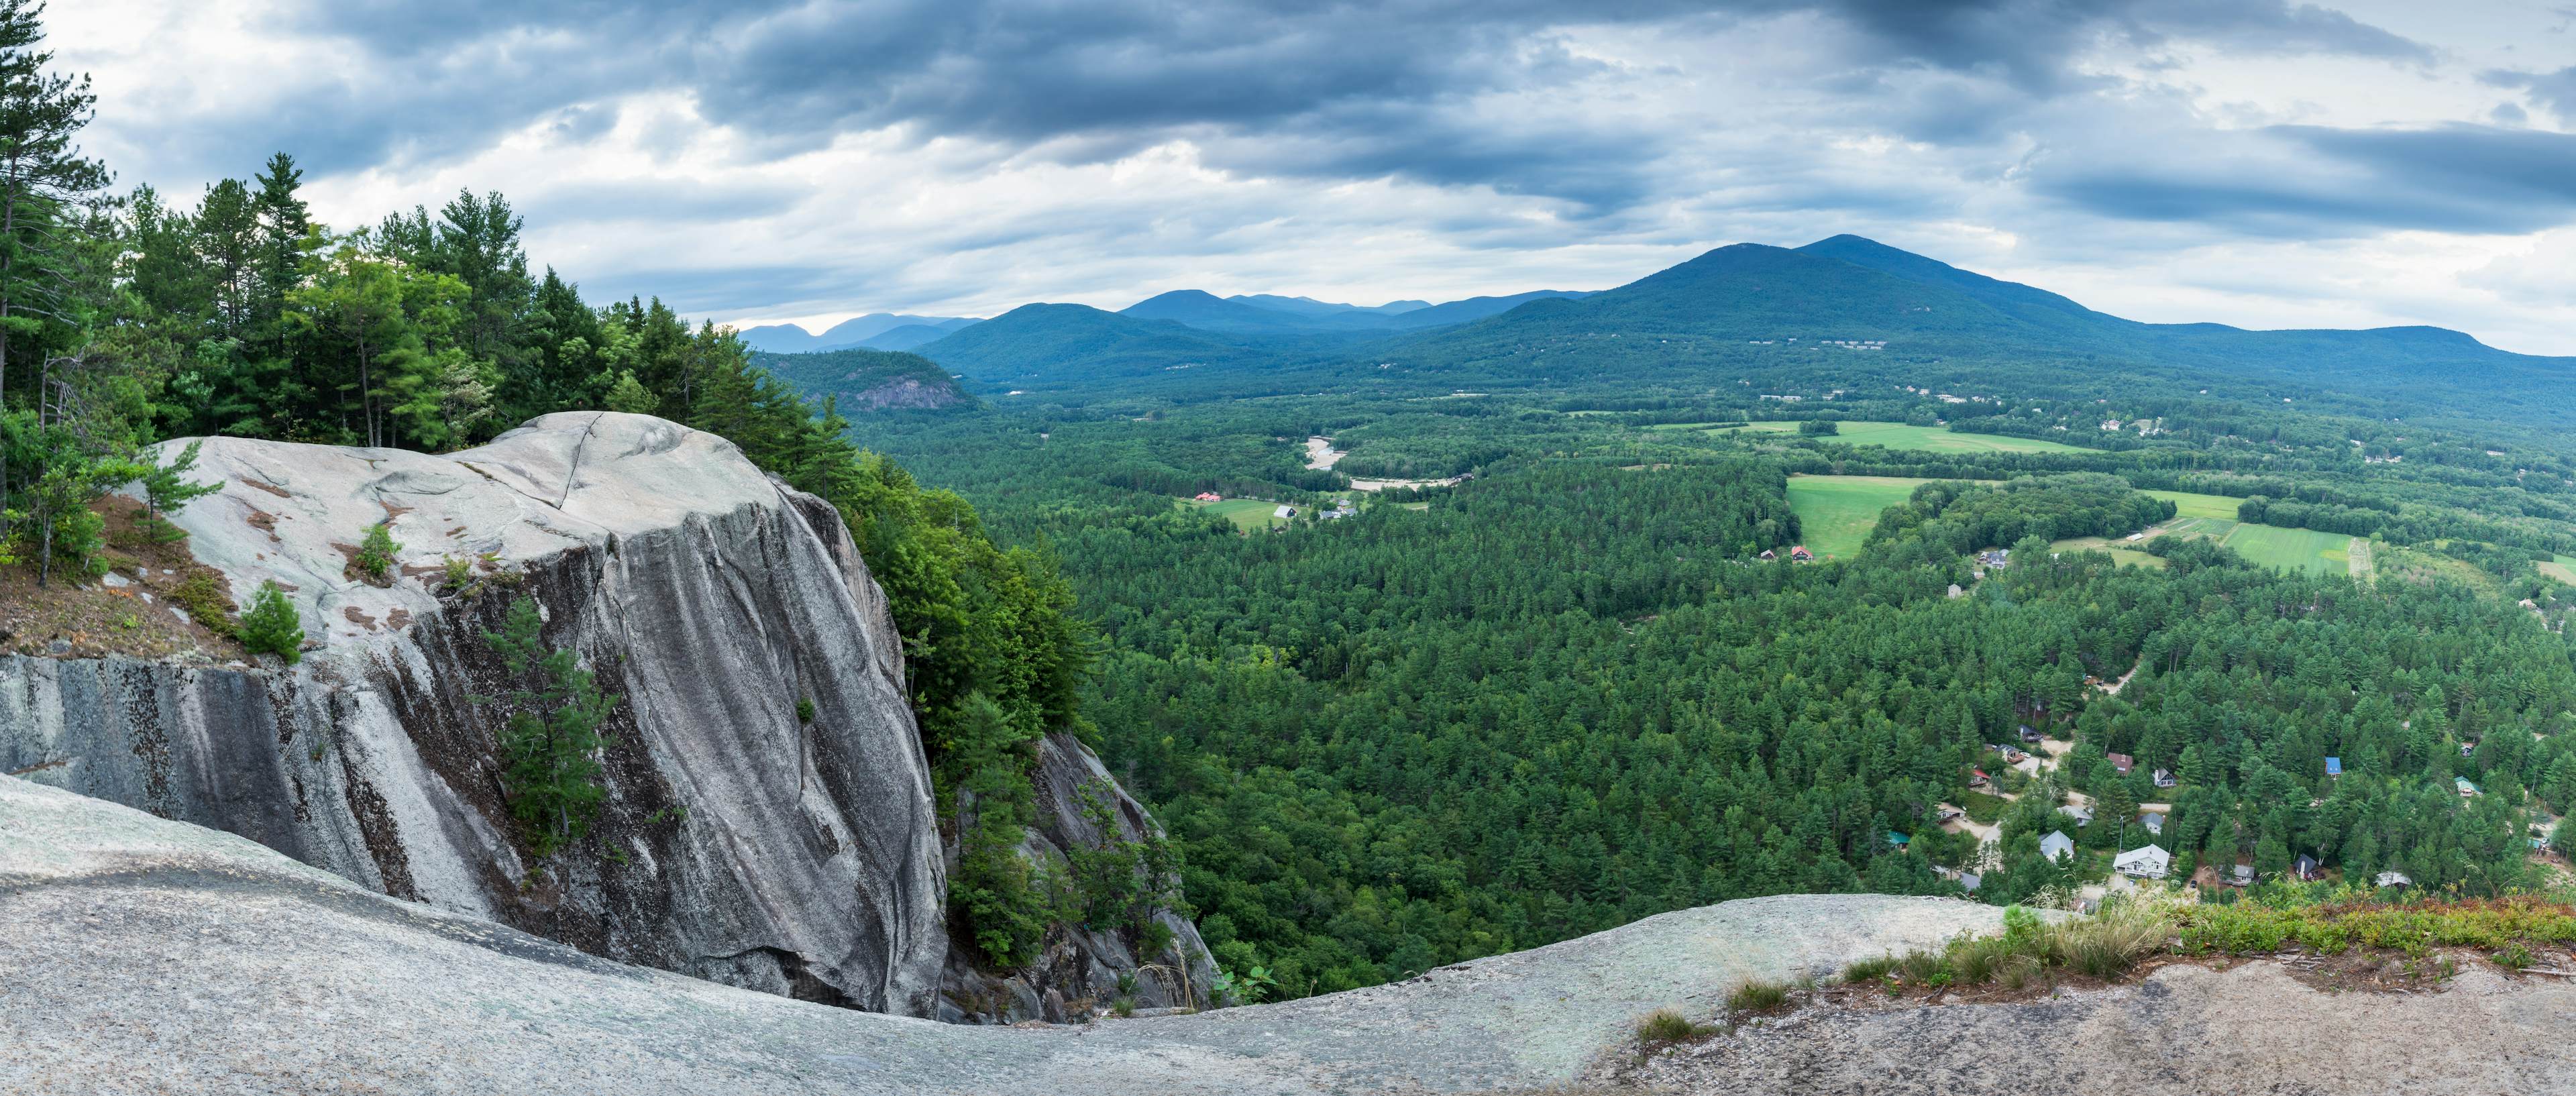 NH rocky cliff, forest below, mountains in distance